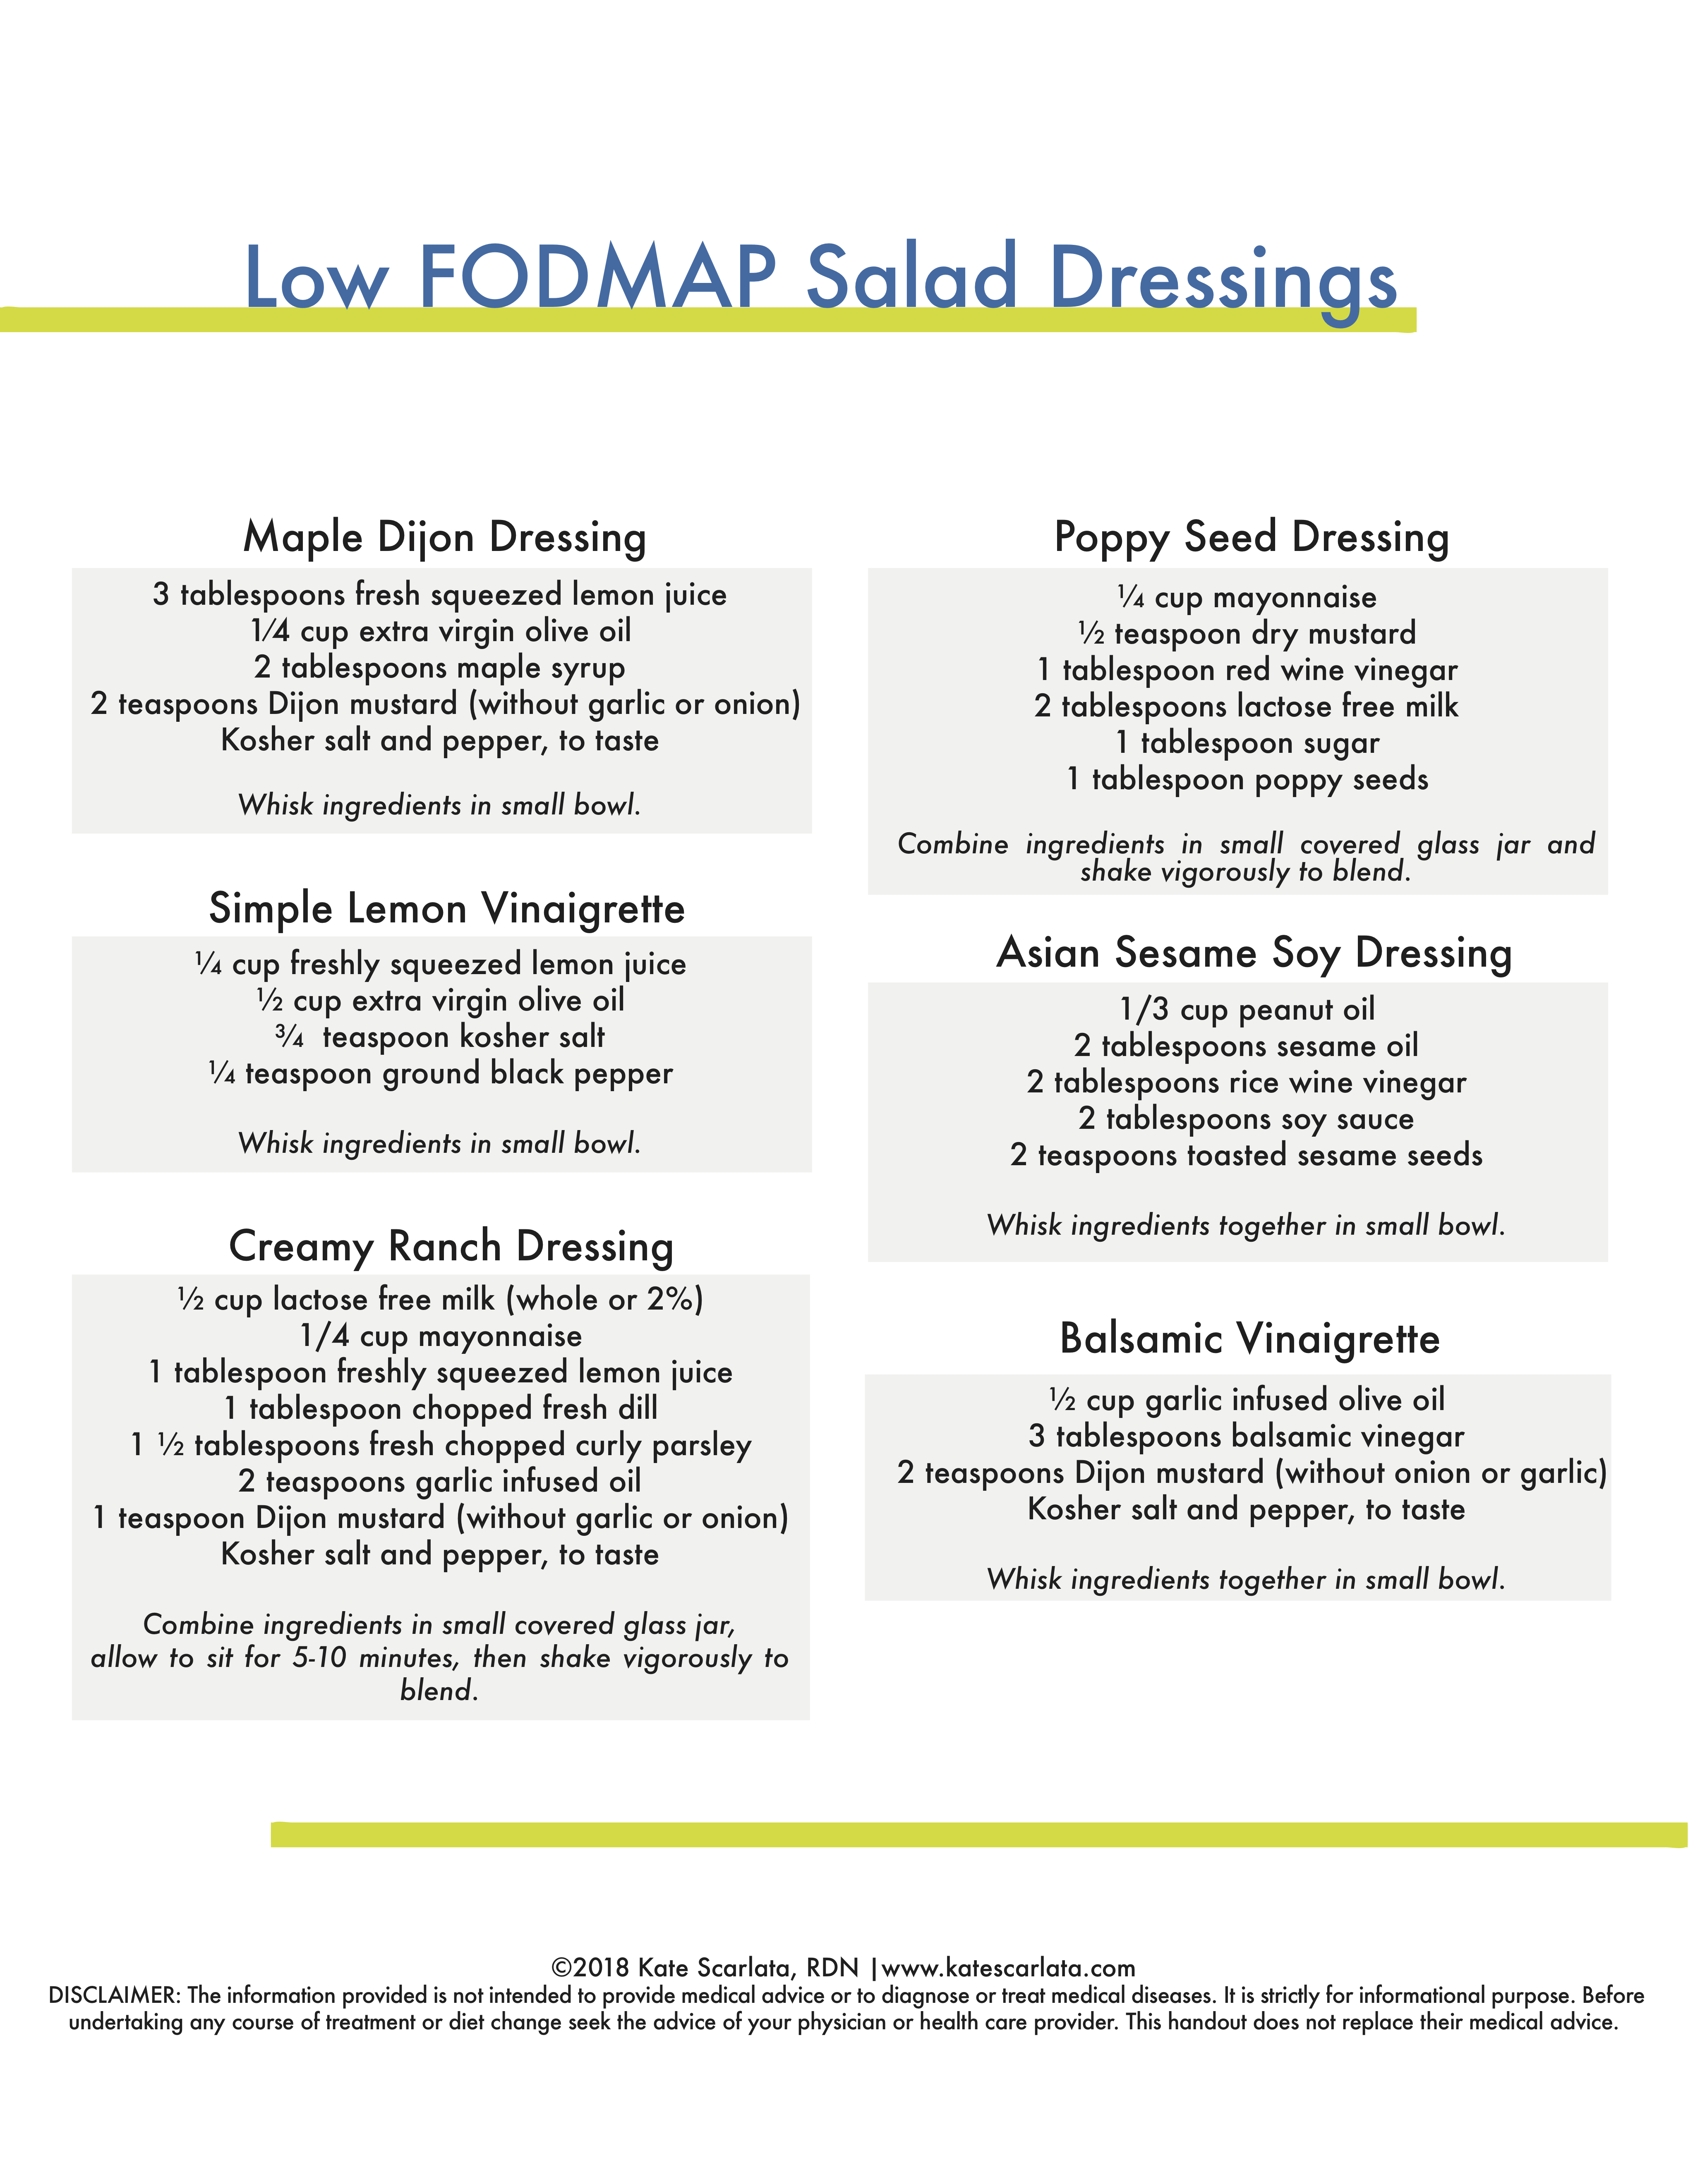 FODMAP friendly Salad Dressings | For A Peace of Mind—Kate Scarlata RDN